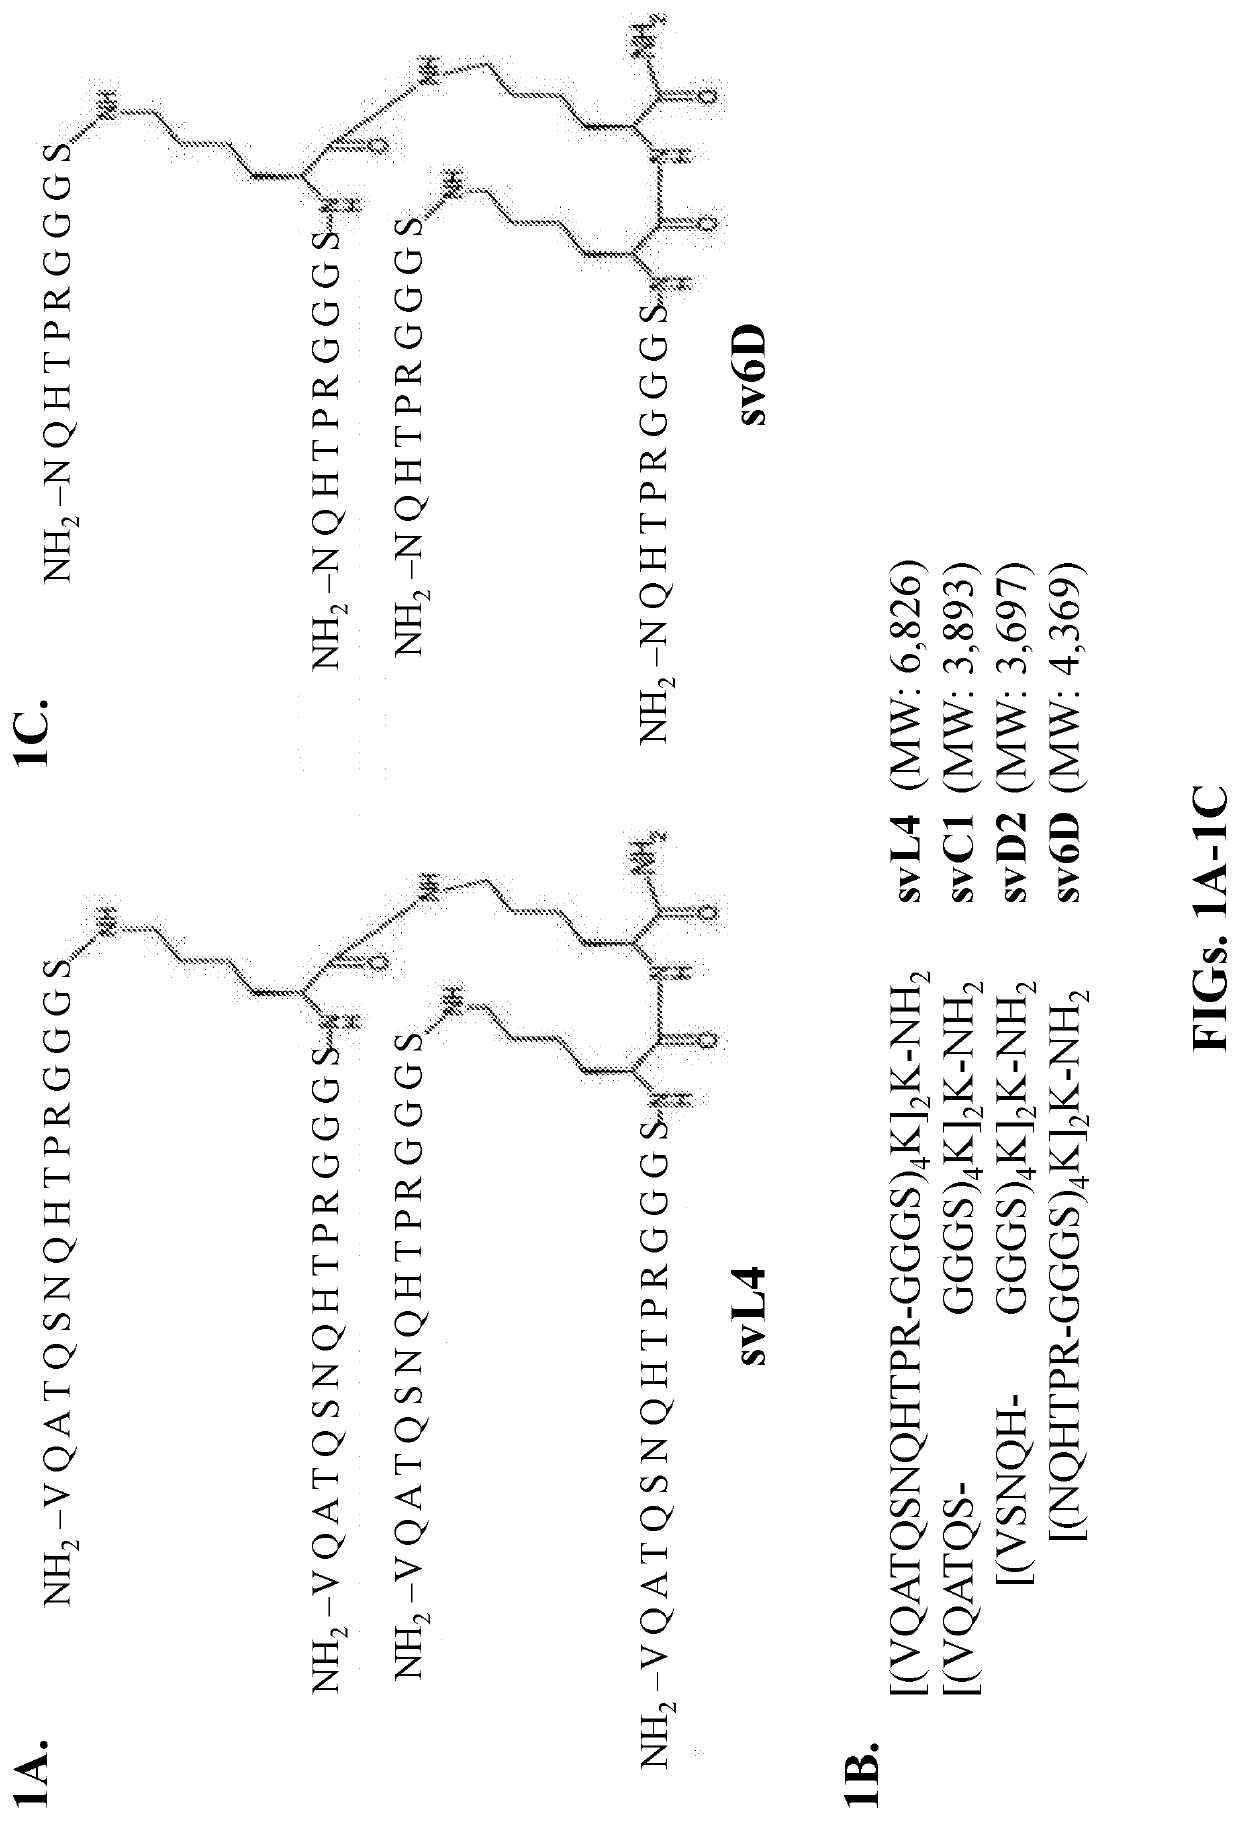 Compositions and methods of treating cancer with glycomimetic peptides